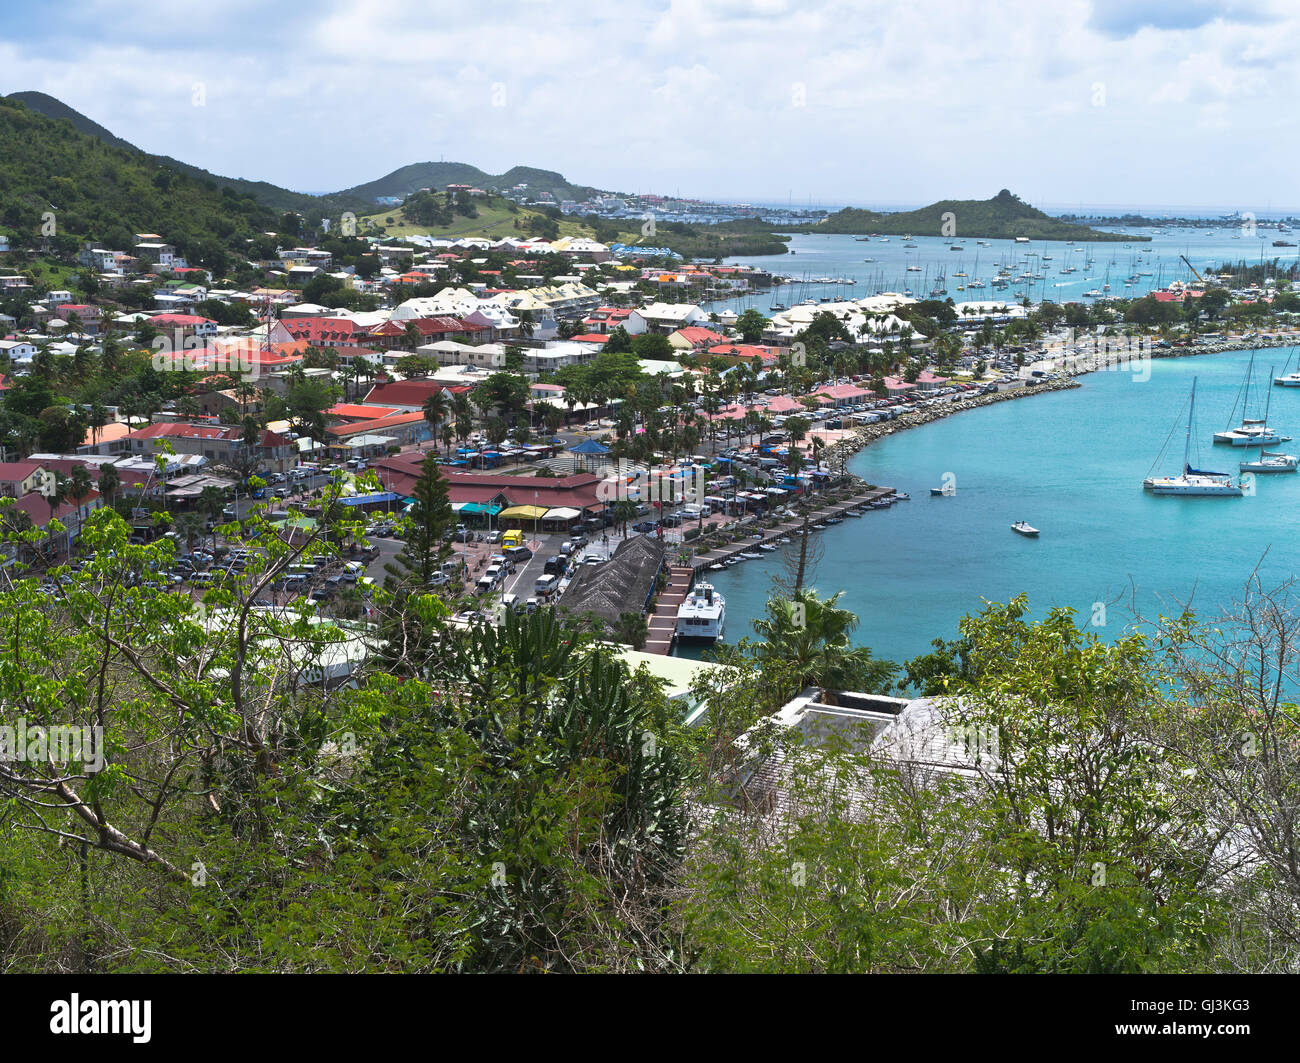 dh Marigot waterfront ST MARTIN CARIBBEAN Bay and town west indies saint Martins french port leeward islands Stock Photo